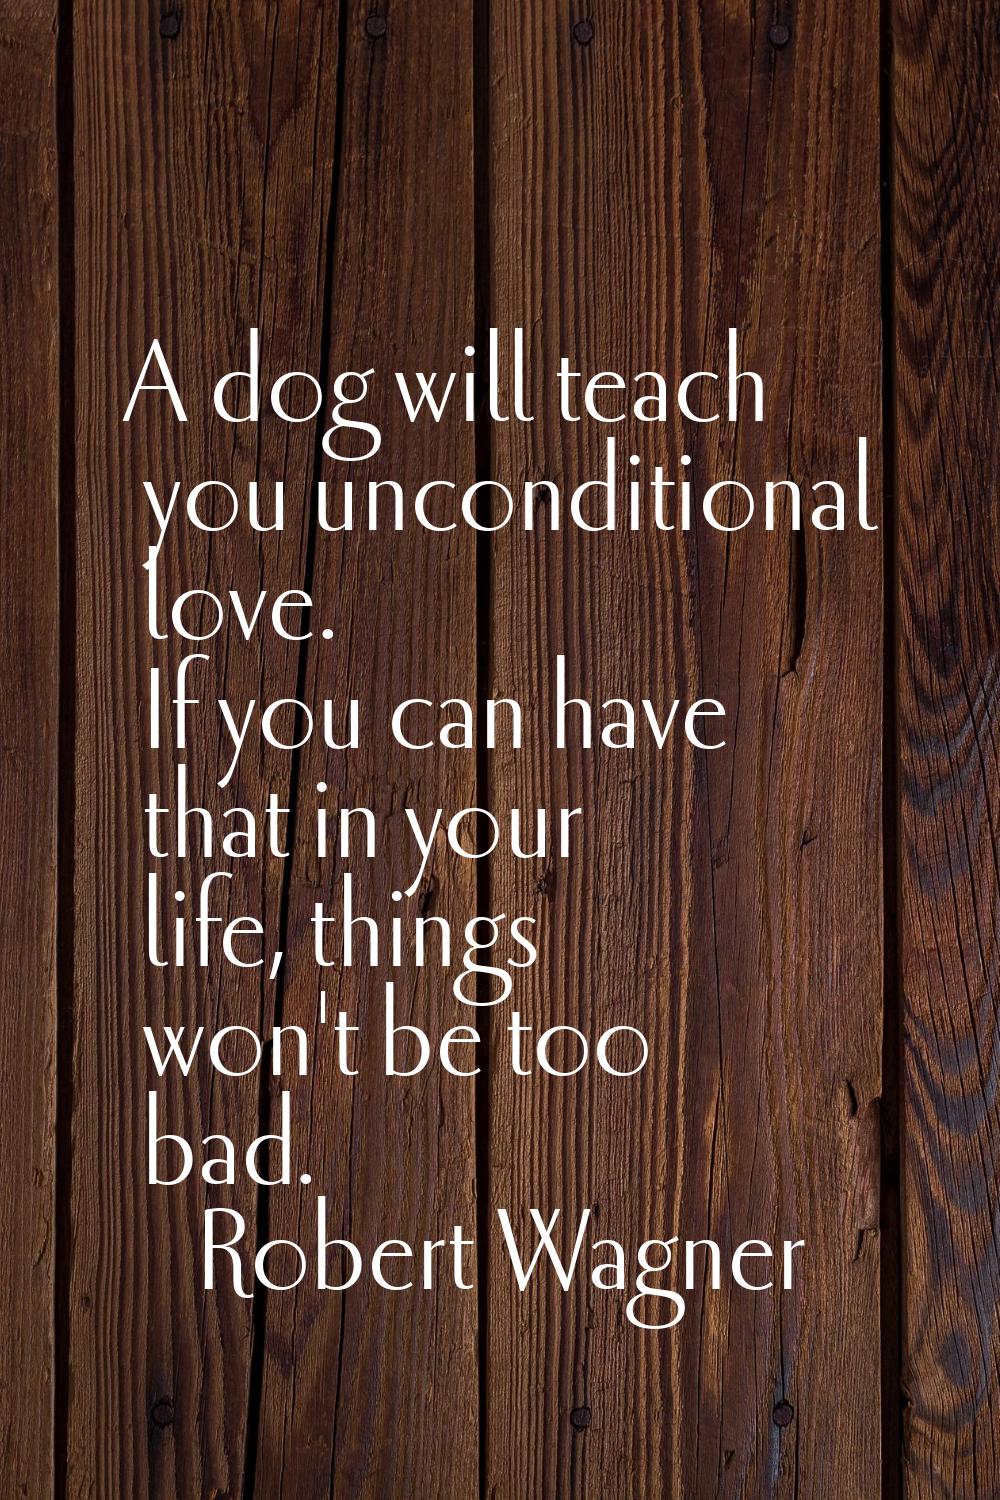 A dog will teach you unconditional love. If you can have that in your life, things won't be too bad